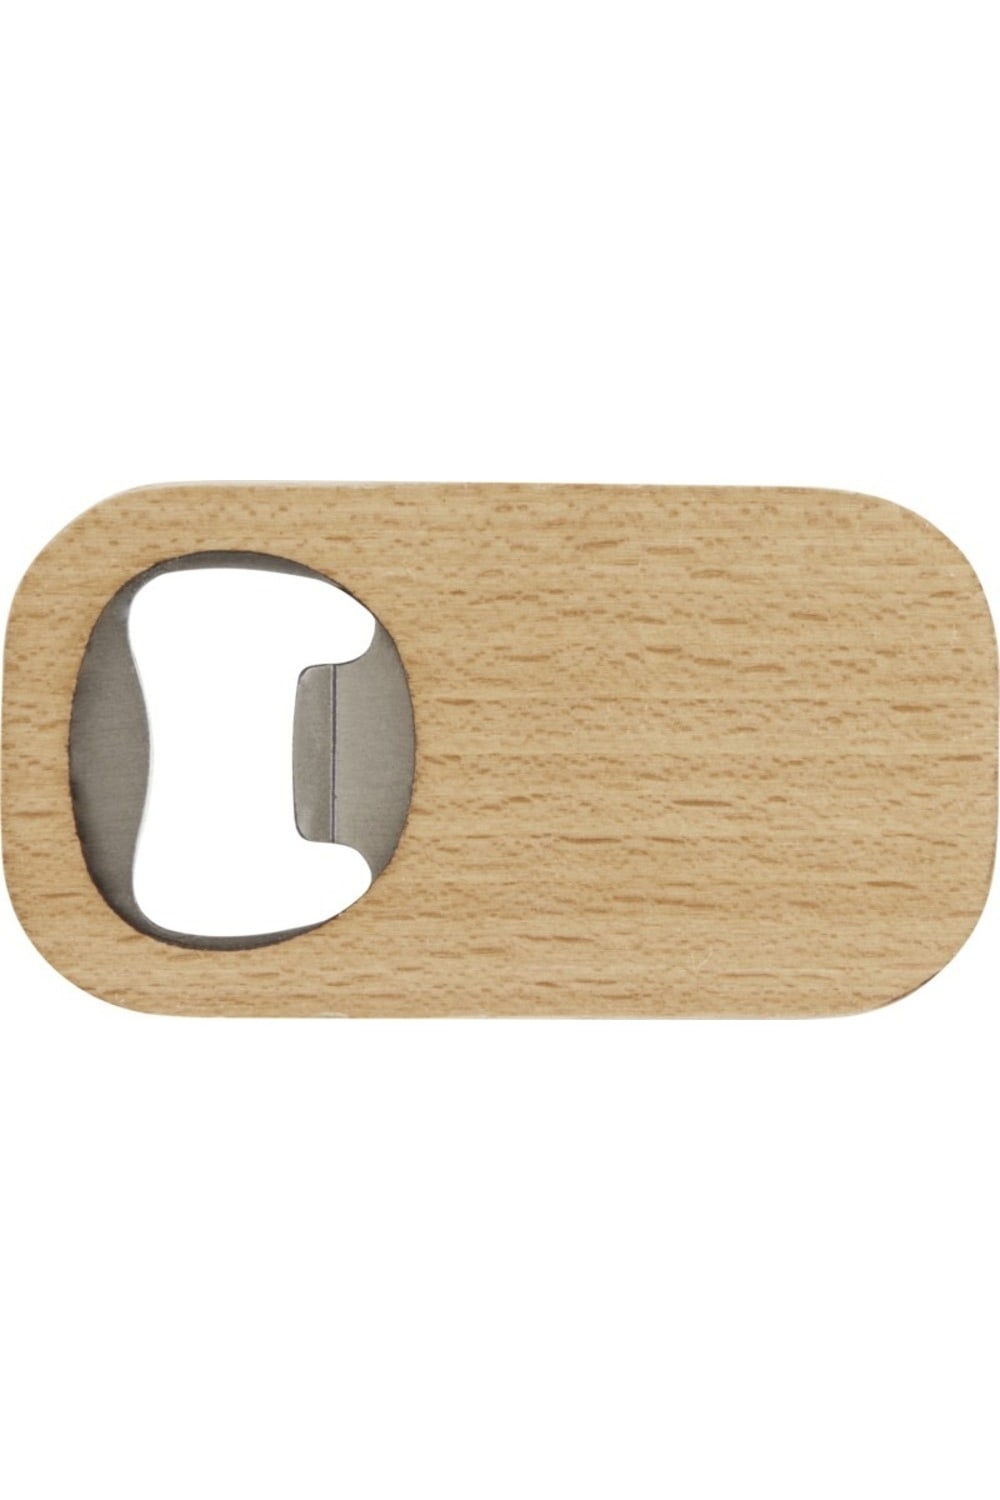 Bullet Boemia Bottle Opener And Coaster (Natural/Silver) (One Size)